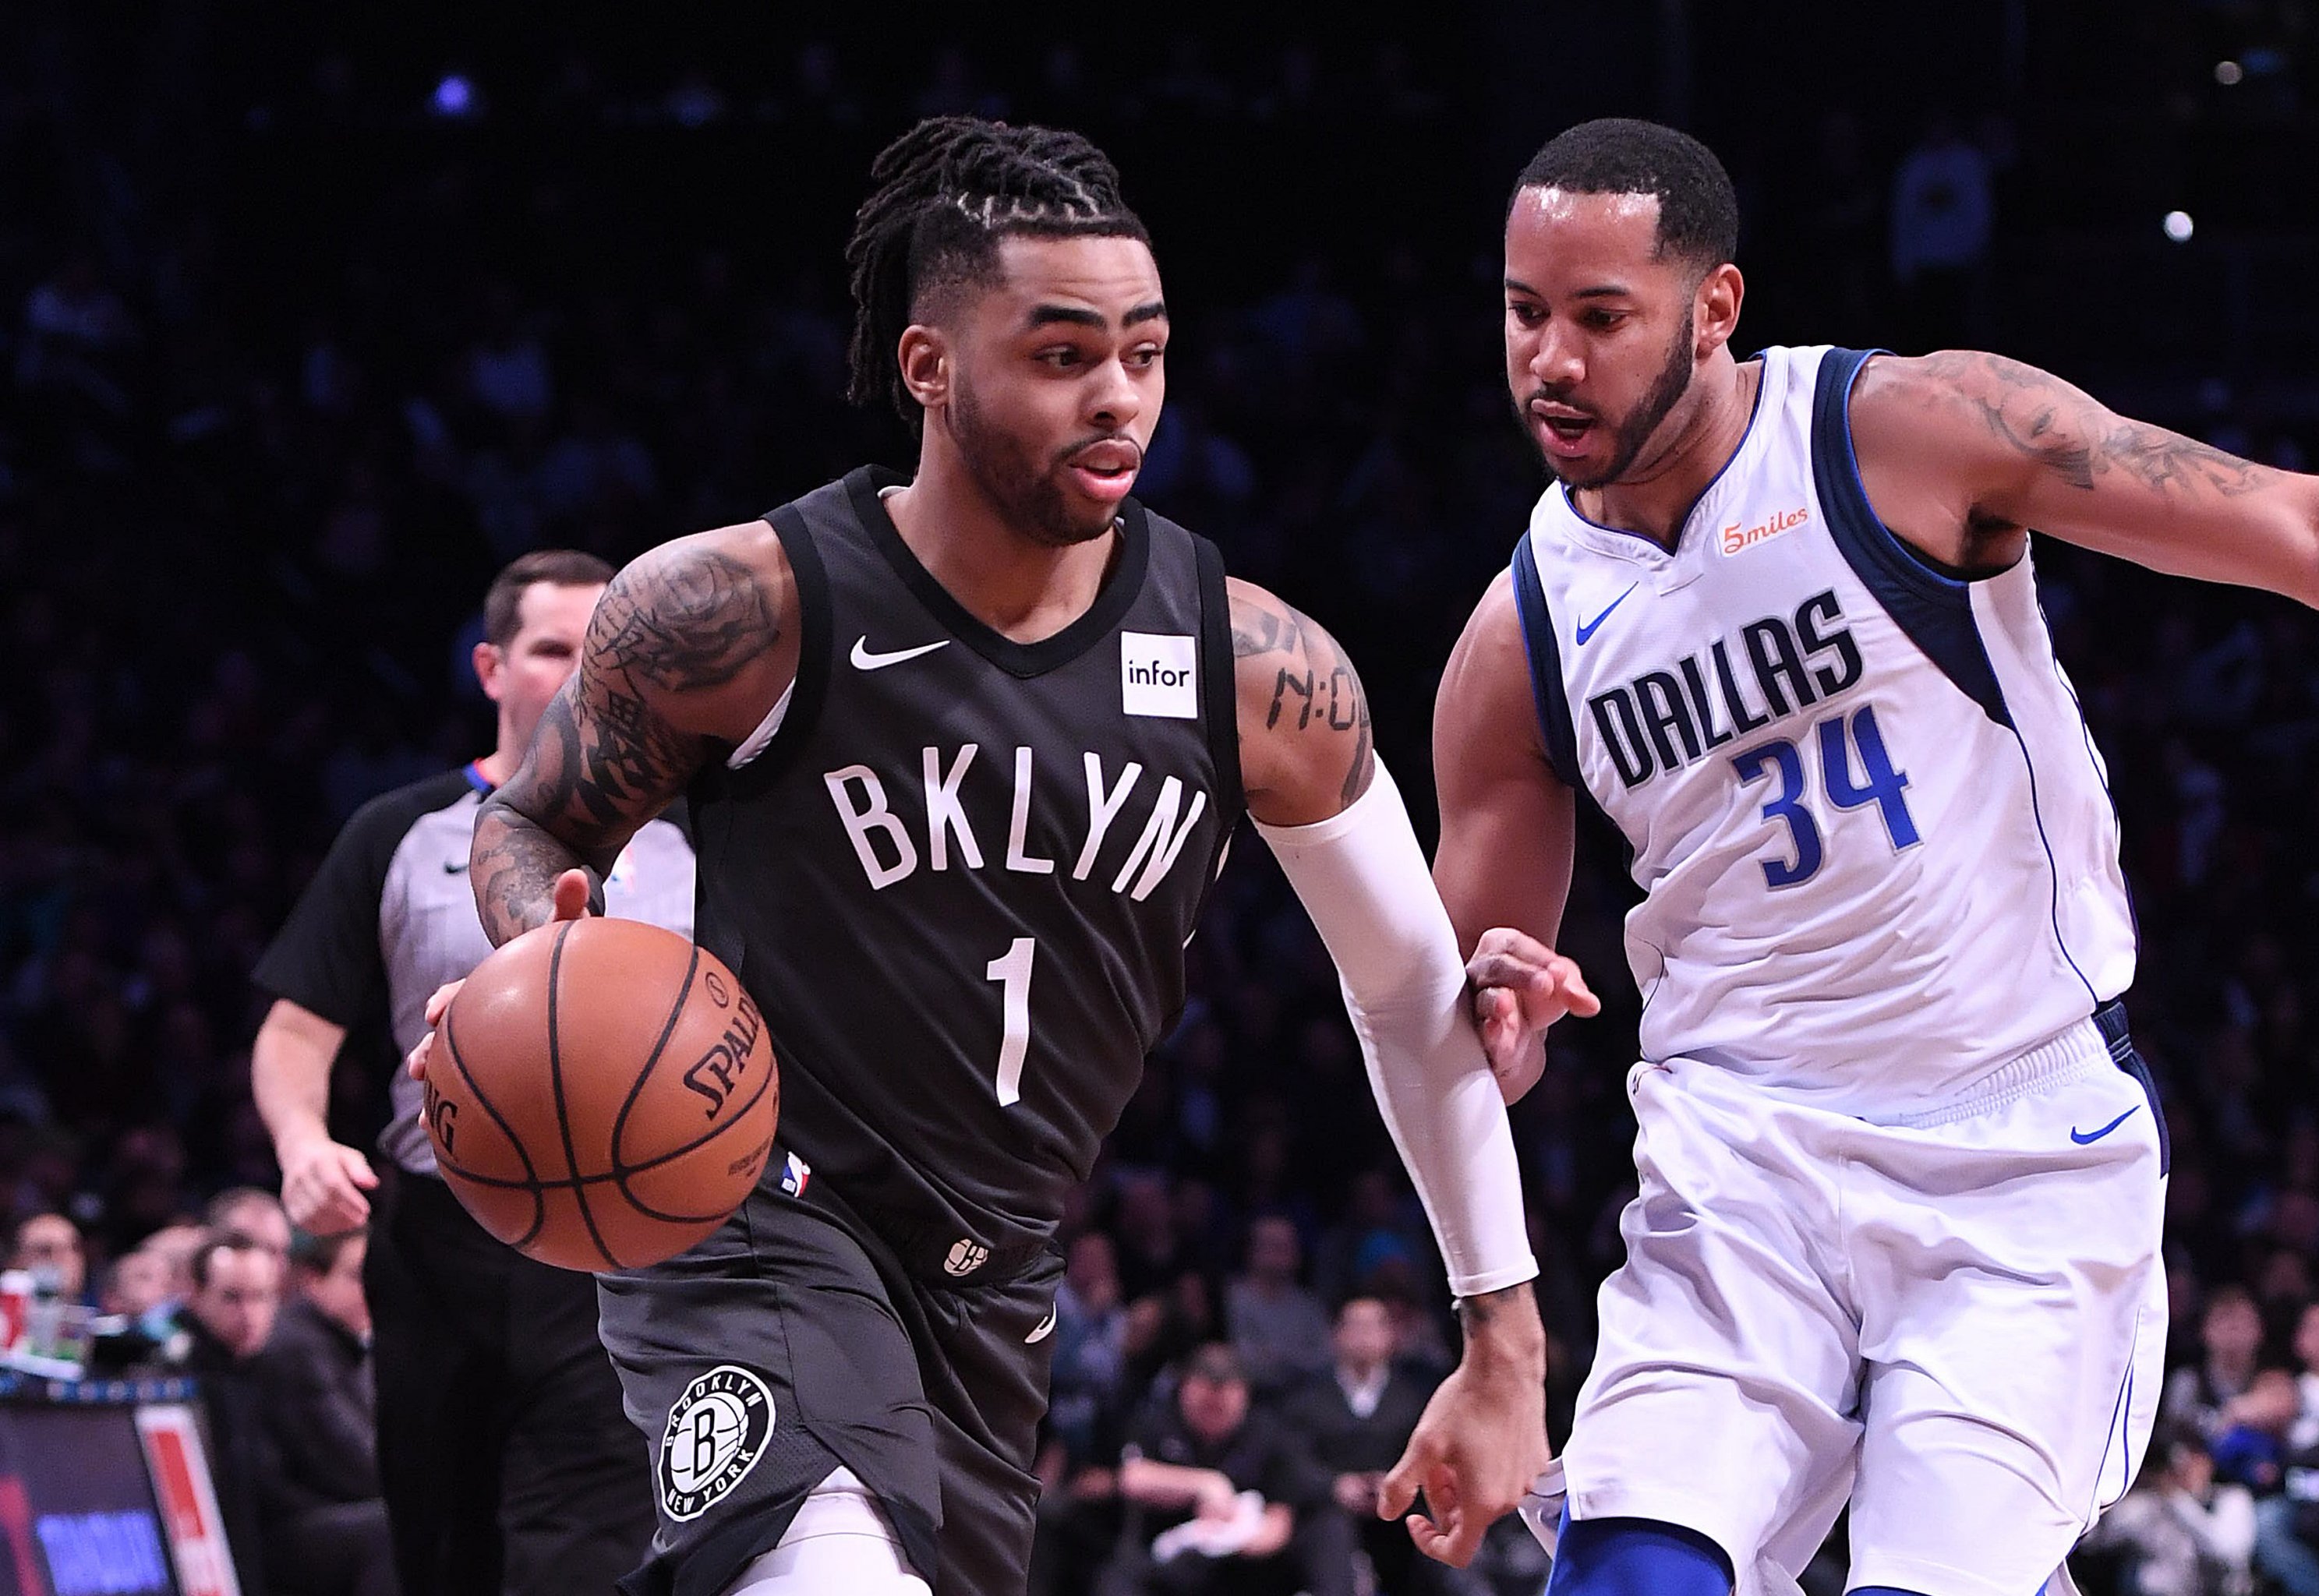 Lewis: Nets won't extend Nerlens Noel, giving them an open roster